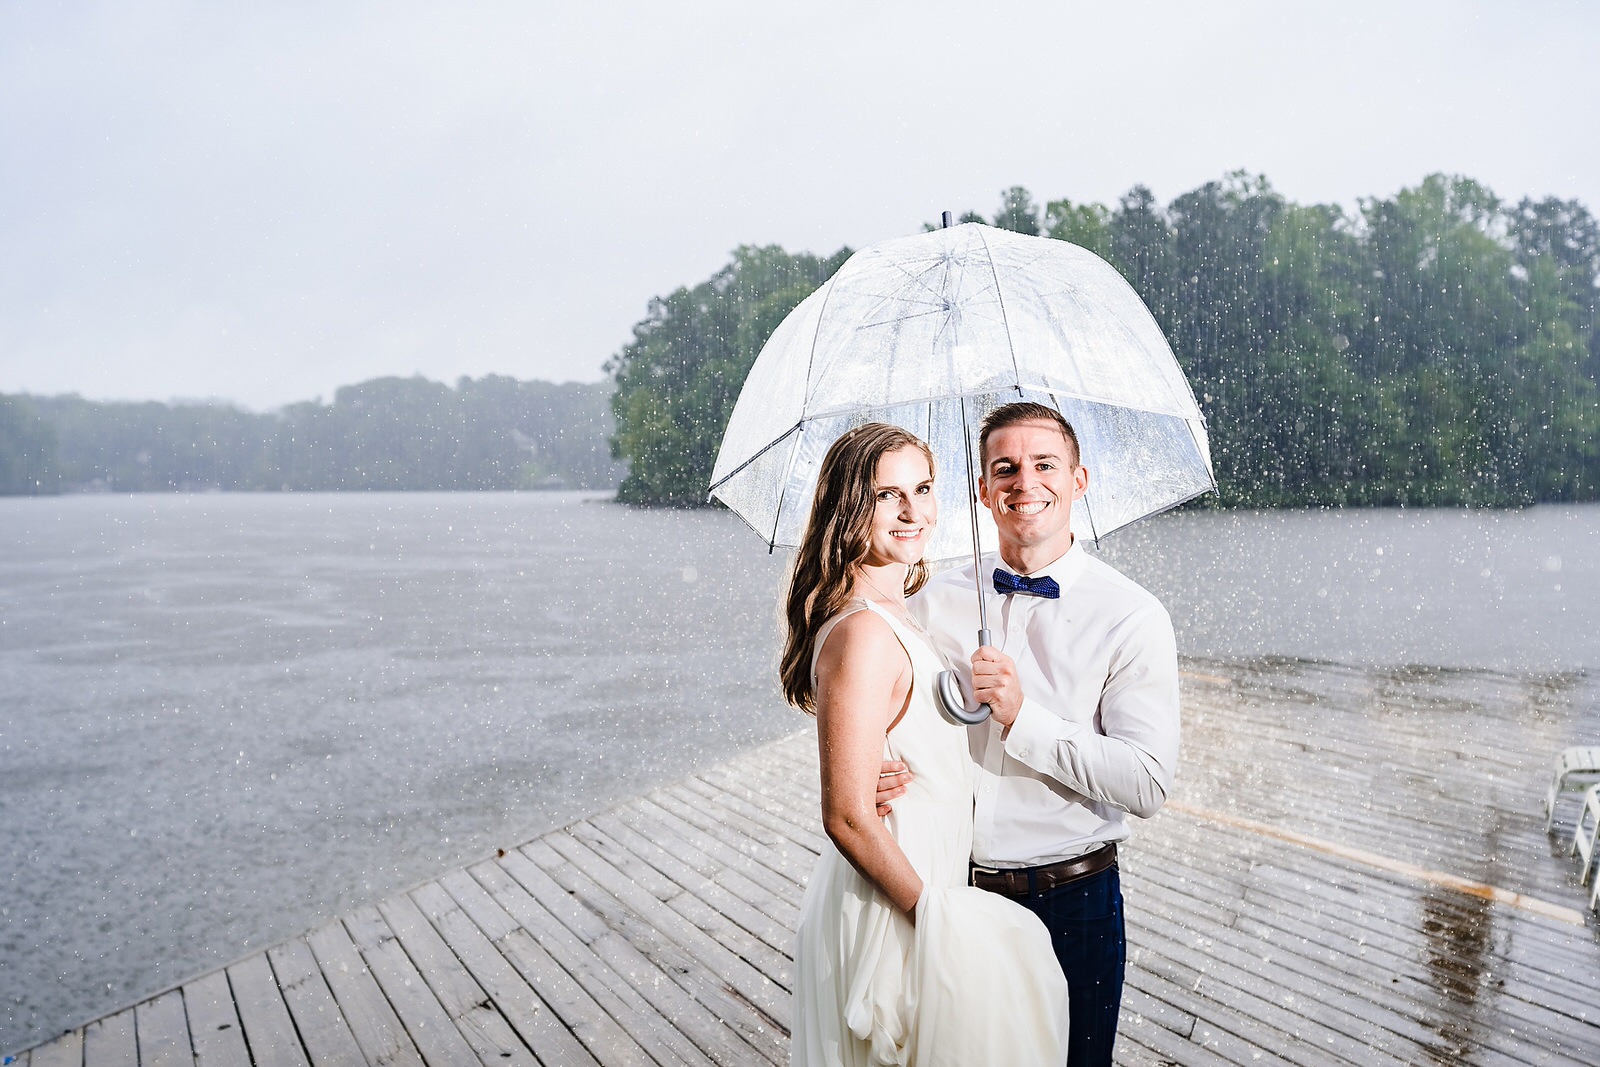 Bride and groom smile under an umbrella in the pouring rain